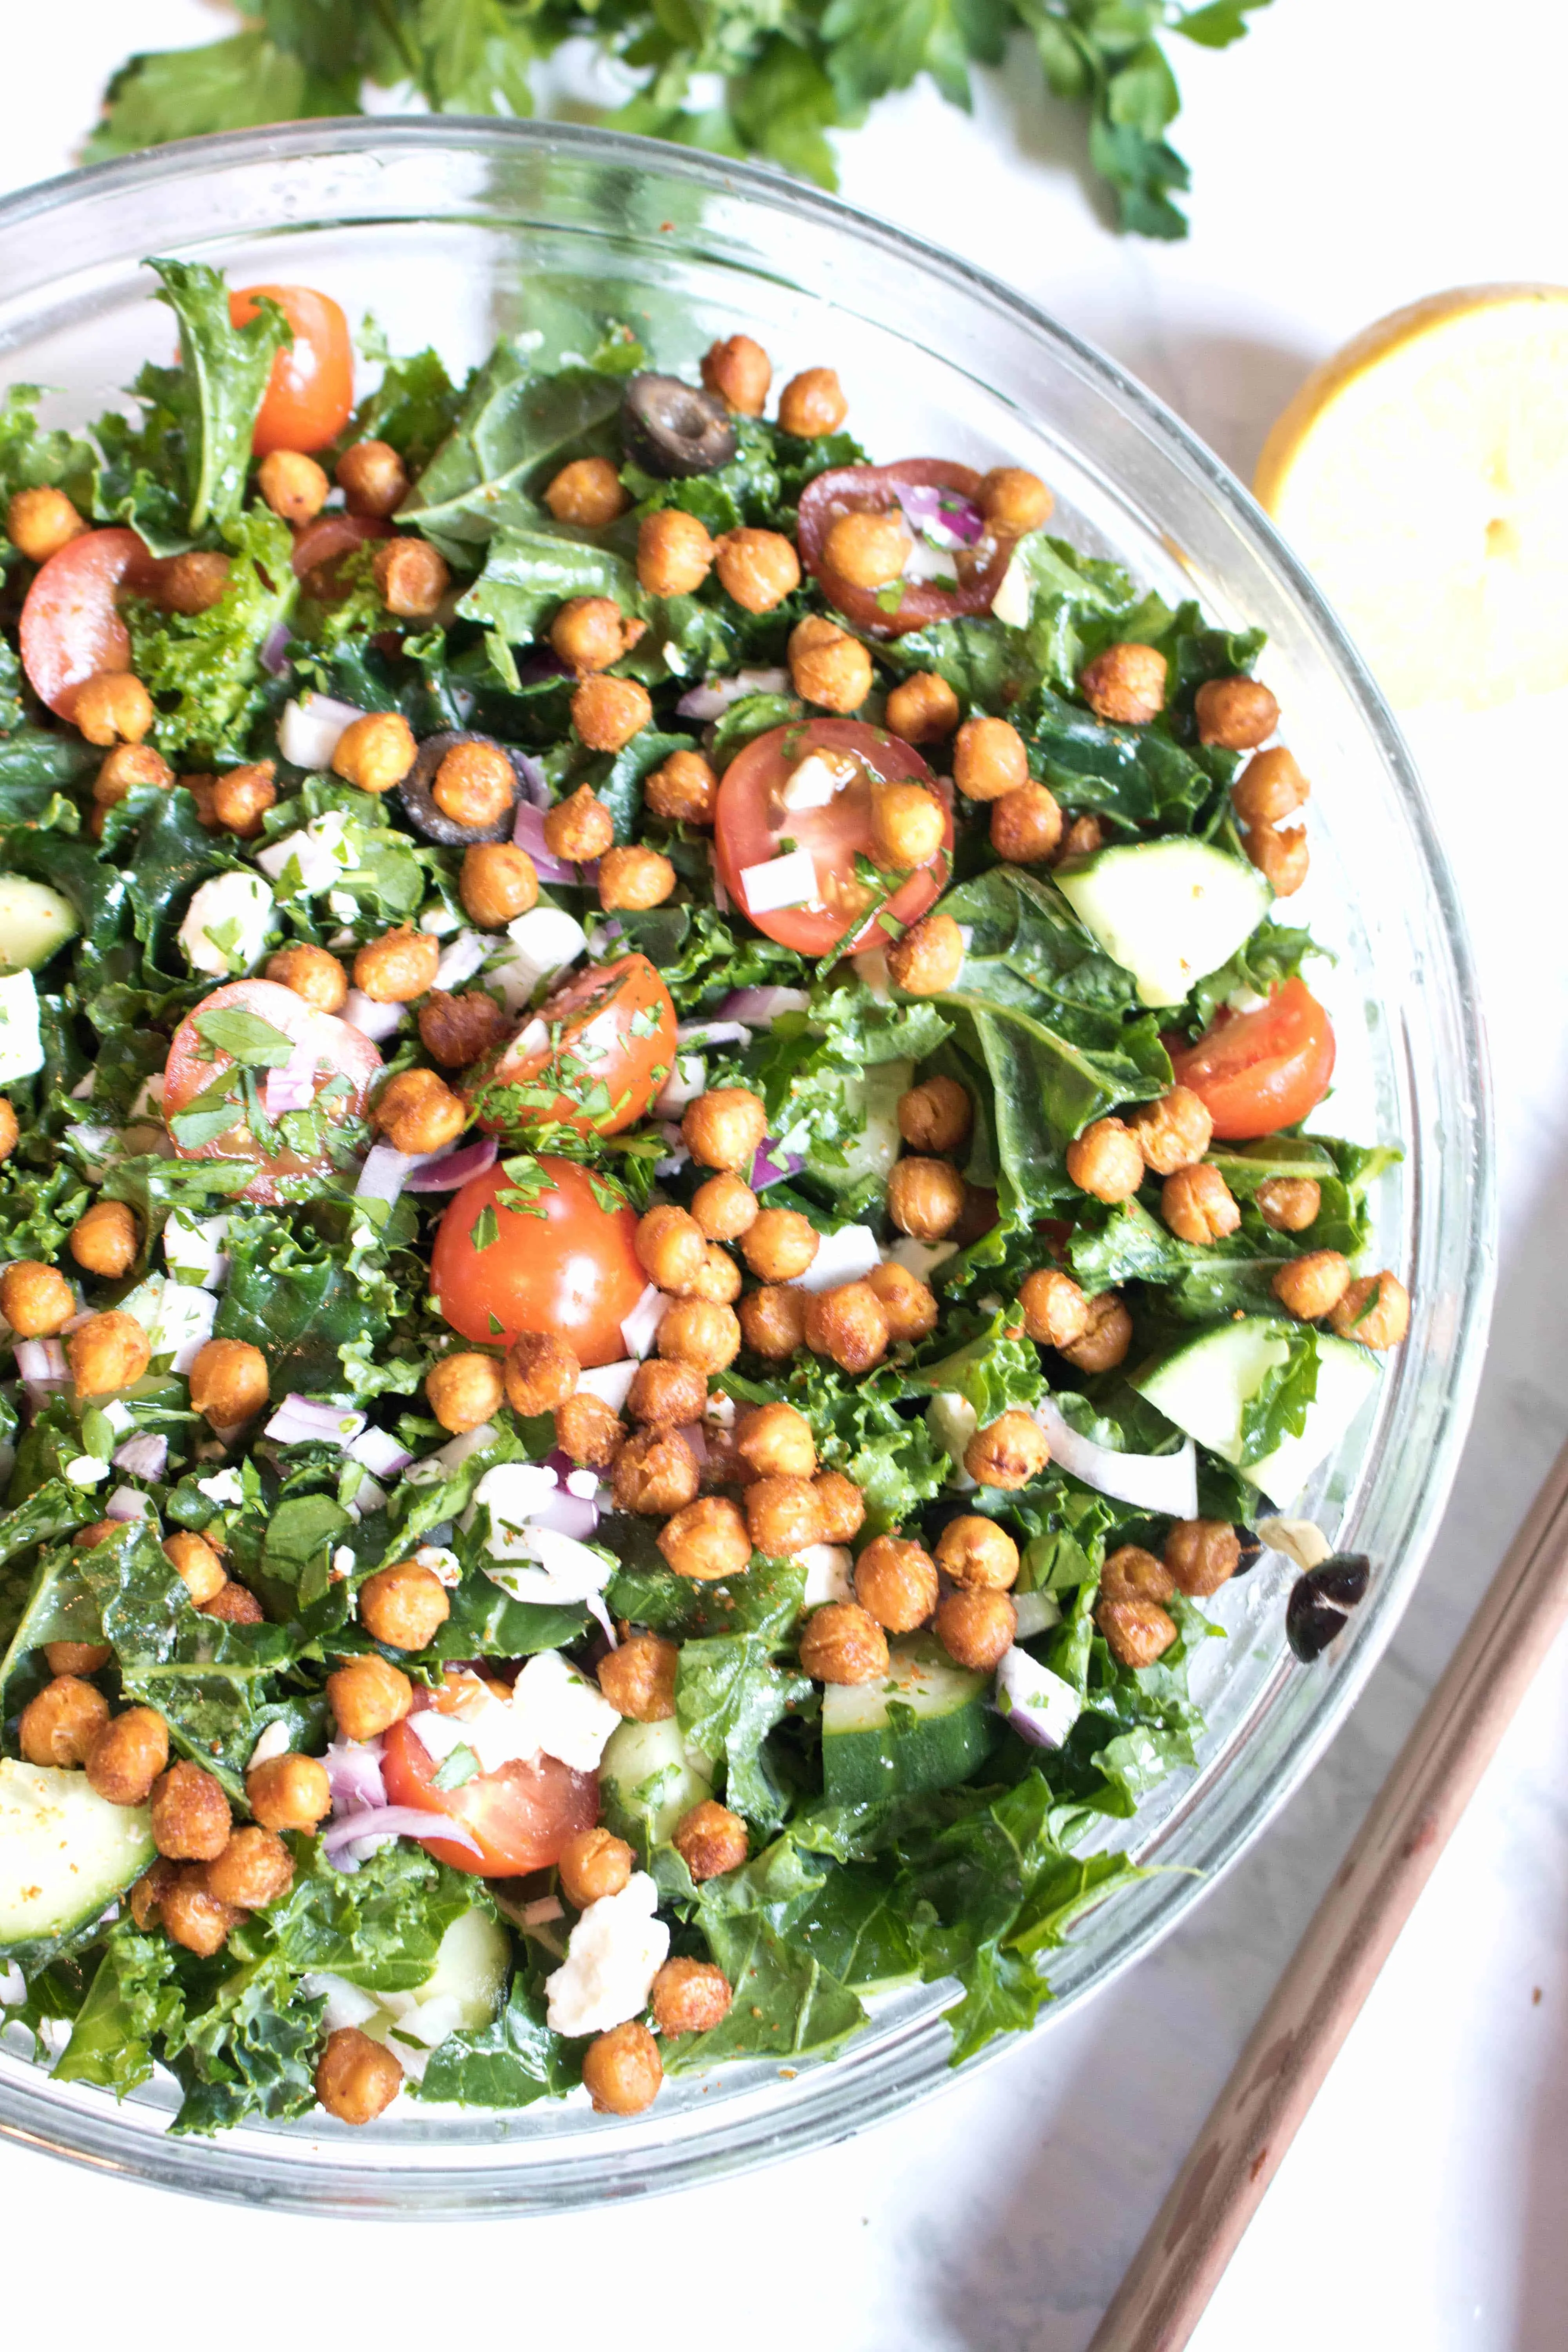 Tomatoes, Feta, olives, cucumbers, tomatoes plus kale and chickpeas in a large bowl